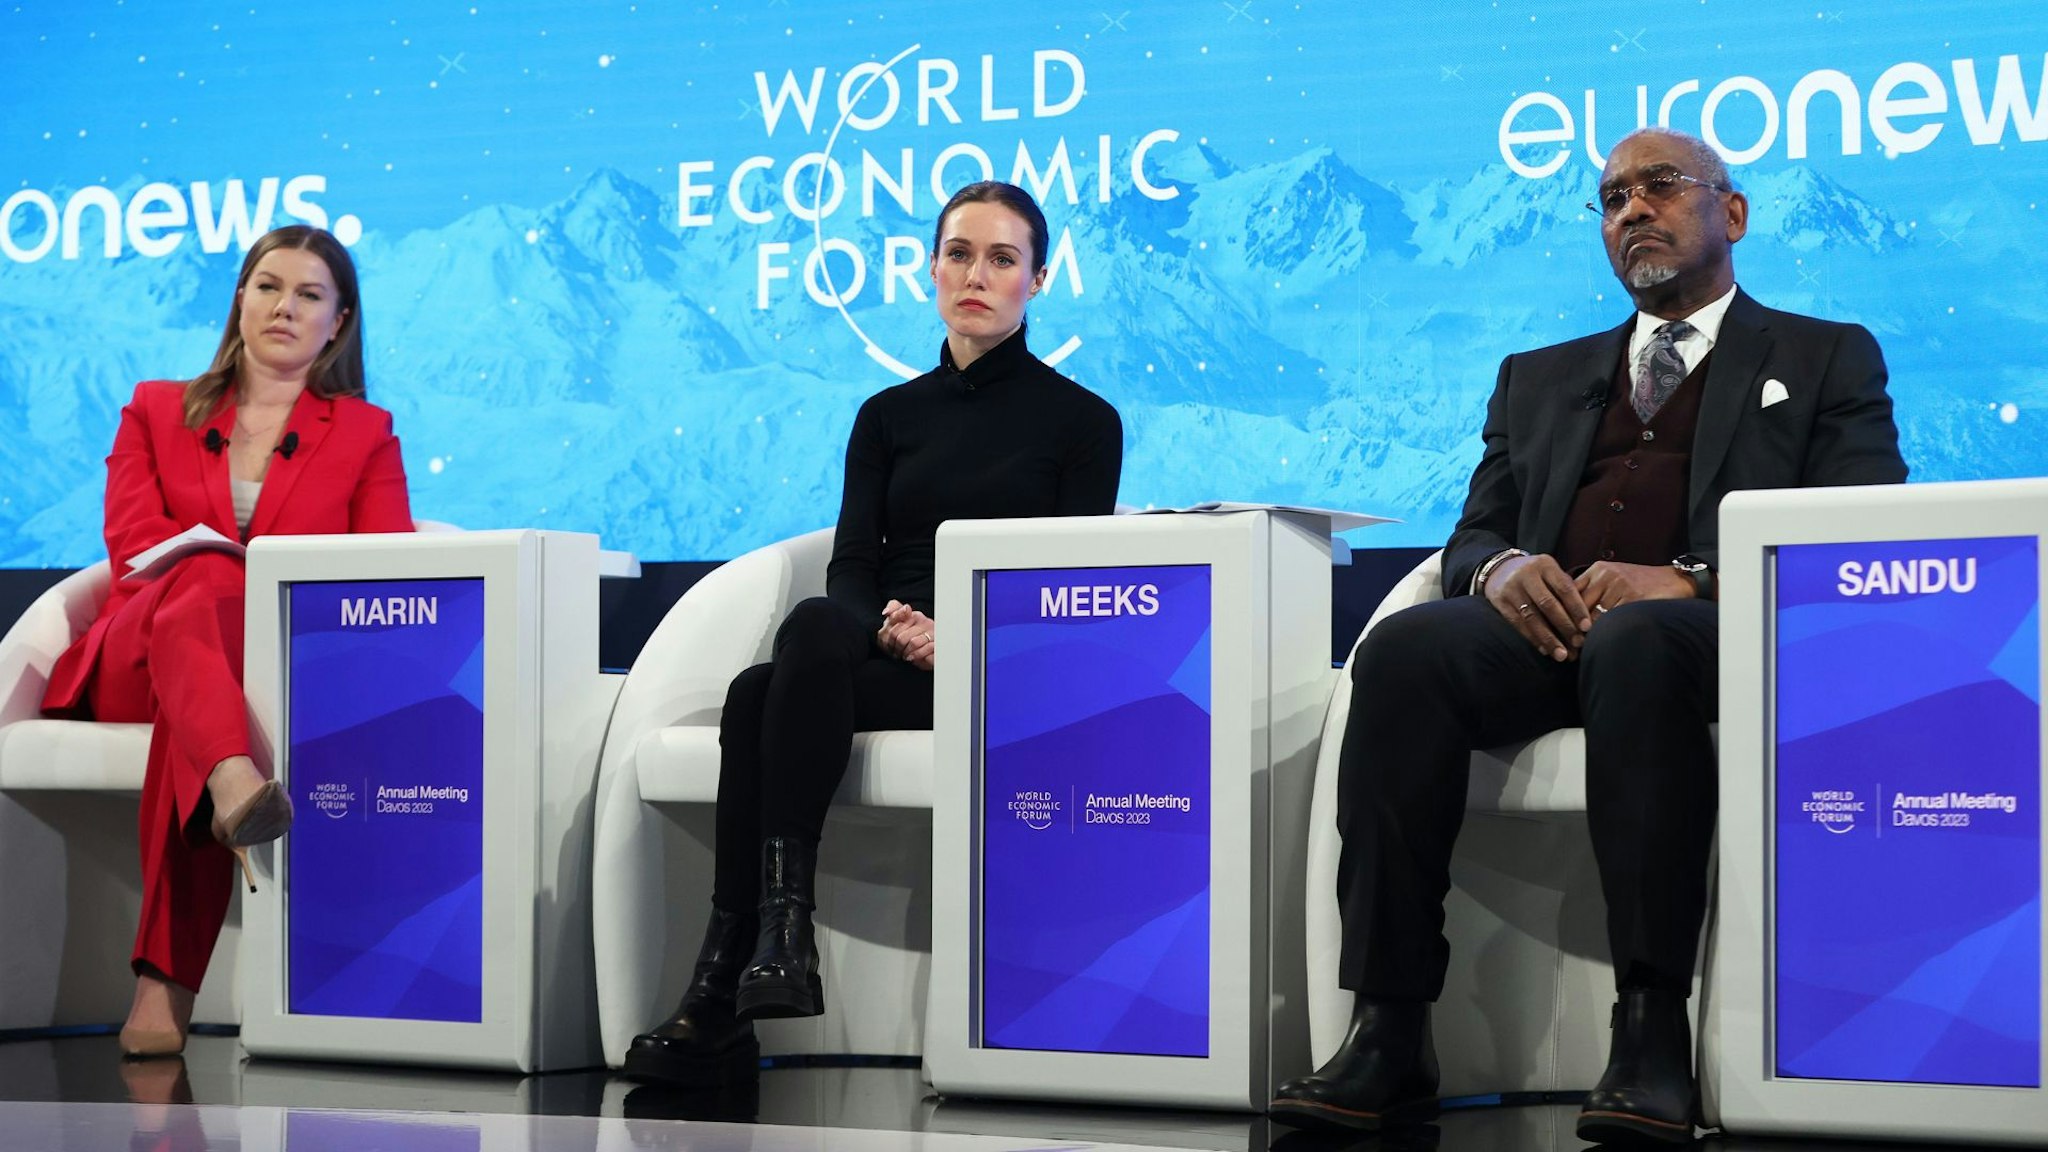 DAVOS, SWITZERLAND - JANUARY 17: US House Foreign Affairs Committee Chairman Gregory Meeks (R) and Prime Minister of Finland Sanna Marin (C) attend the World Economic Forum (WEF) in Davos, Switzerland on January 17, 2023.